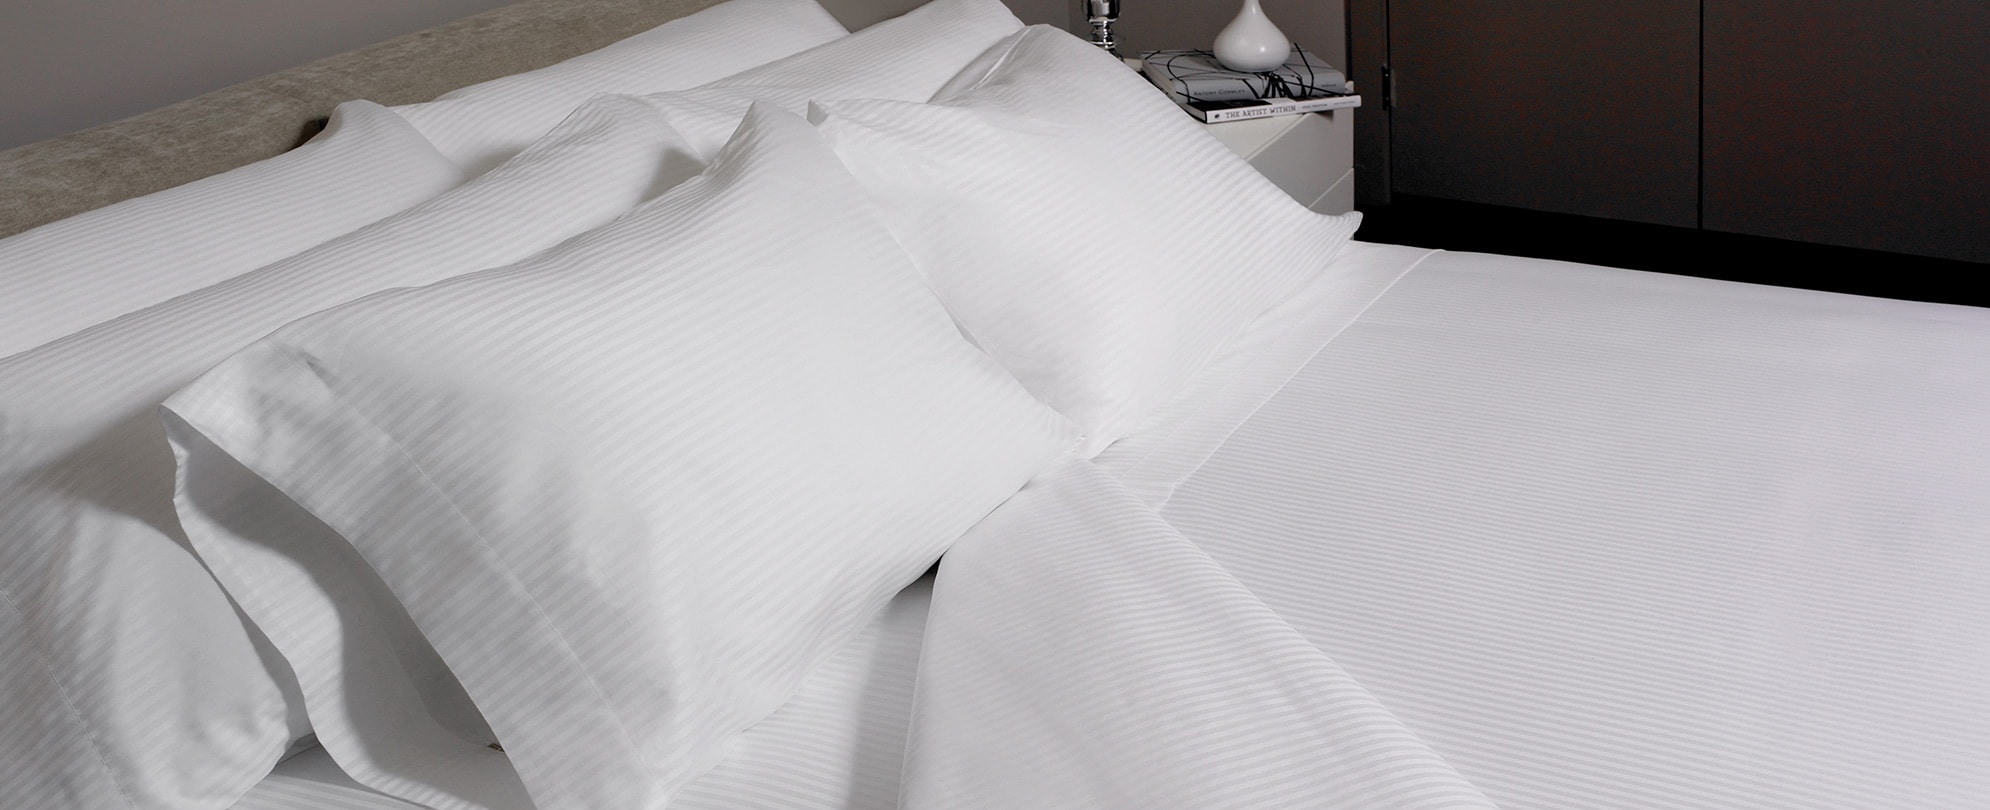 A made queen bed with six fluffy pillows, and the right corner of the white sheets folded down. 